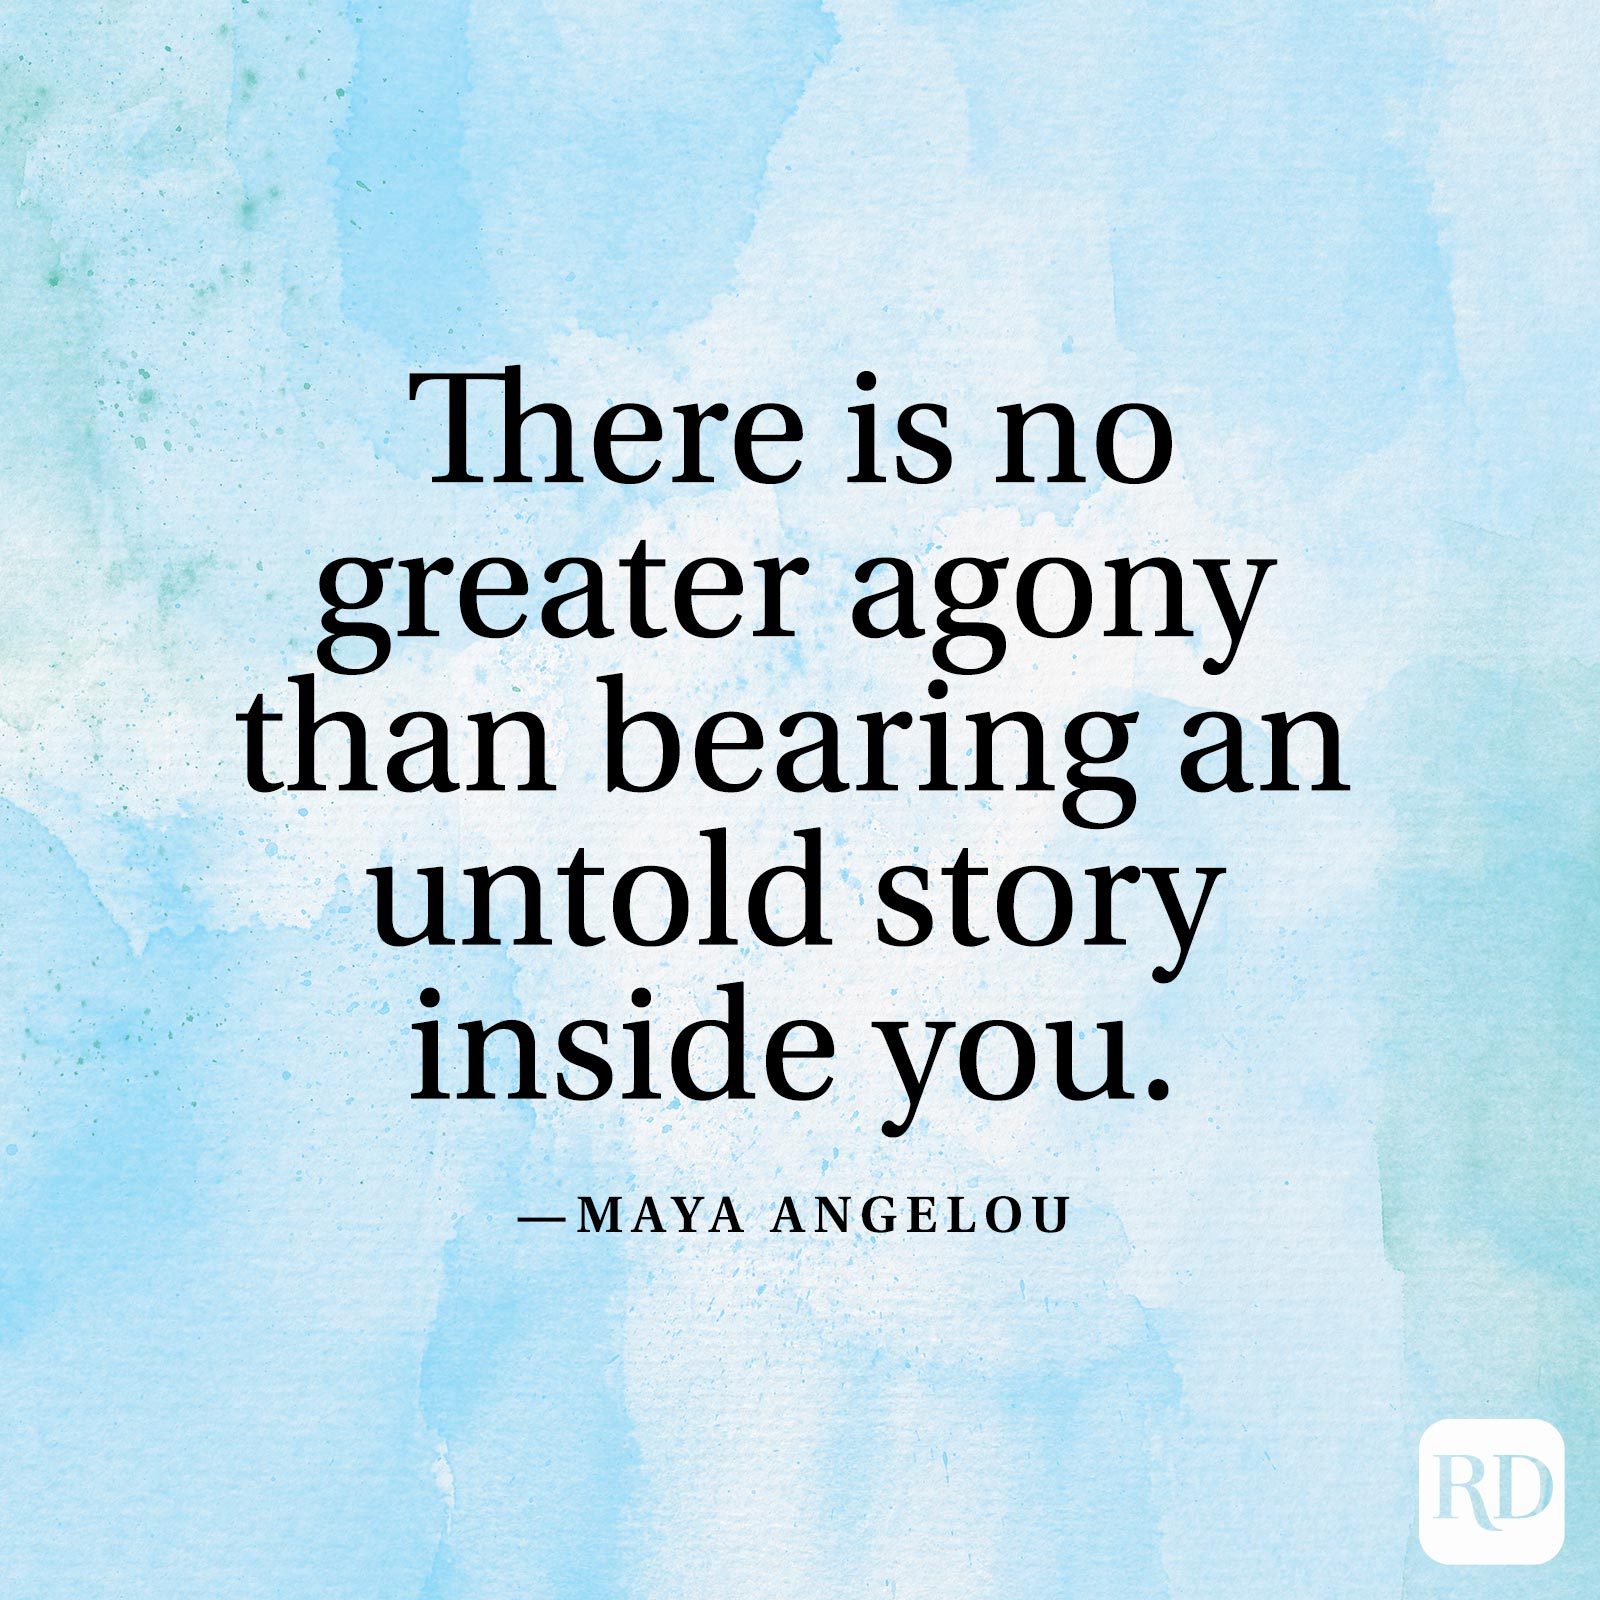 "There is no greater agony than bearing an untold story inside you." —Maya Angelou